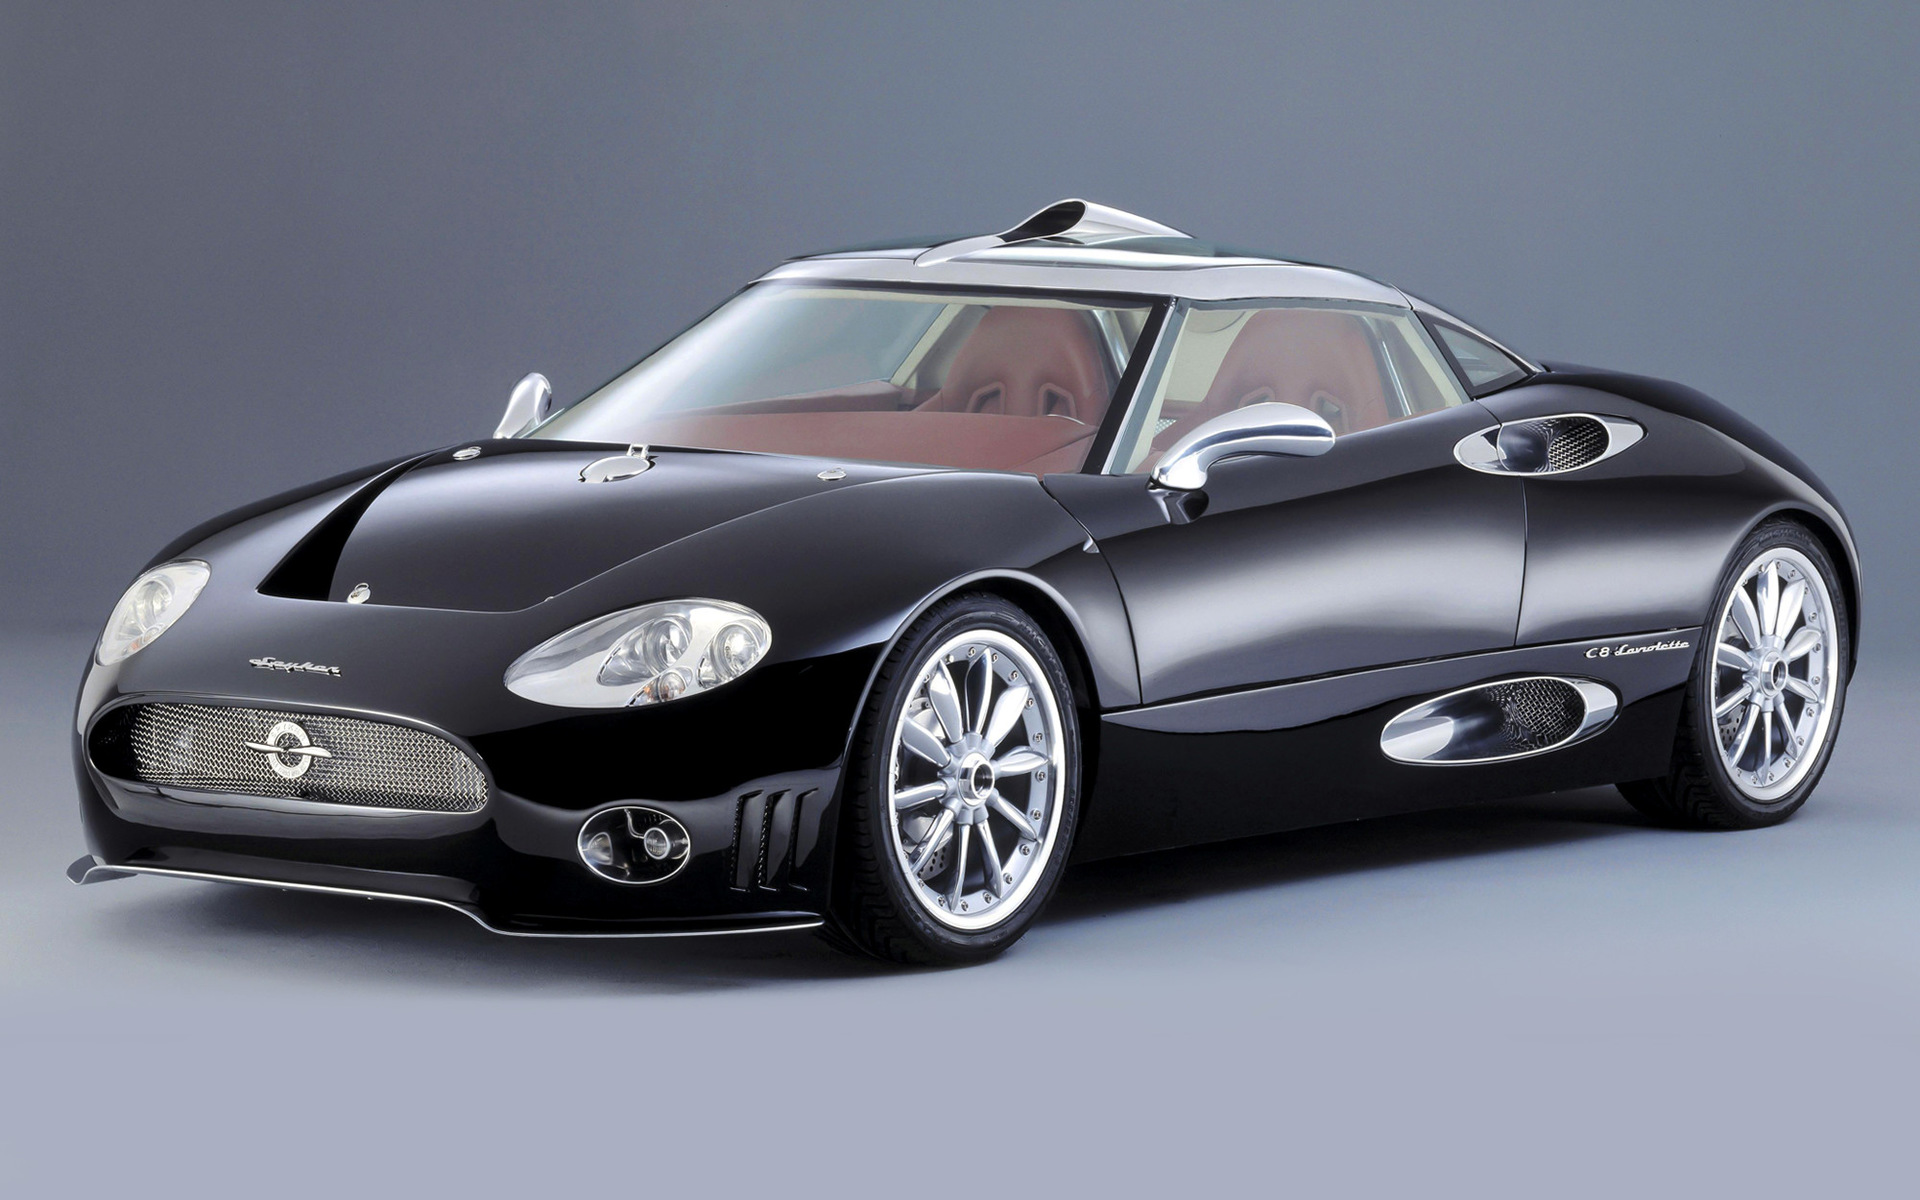 2001 Spyker C8 Laviolette - Wallpapers and HD Images | Car Pixel